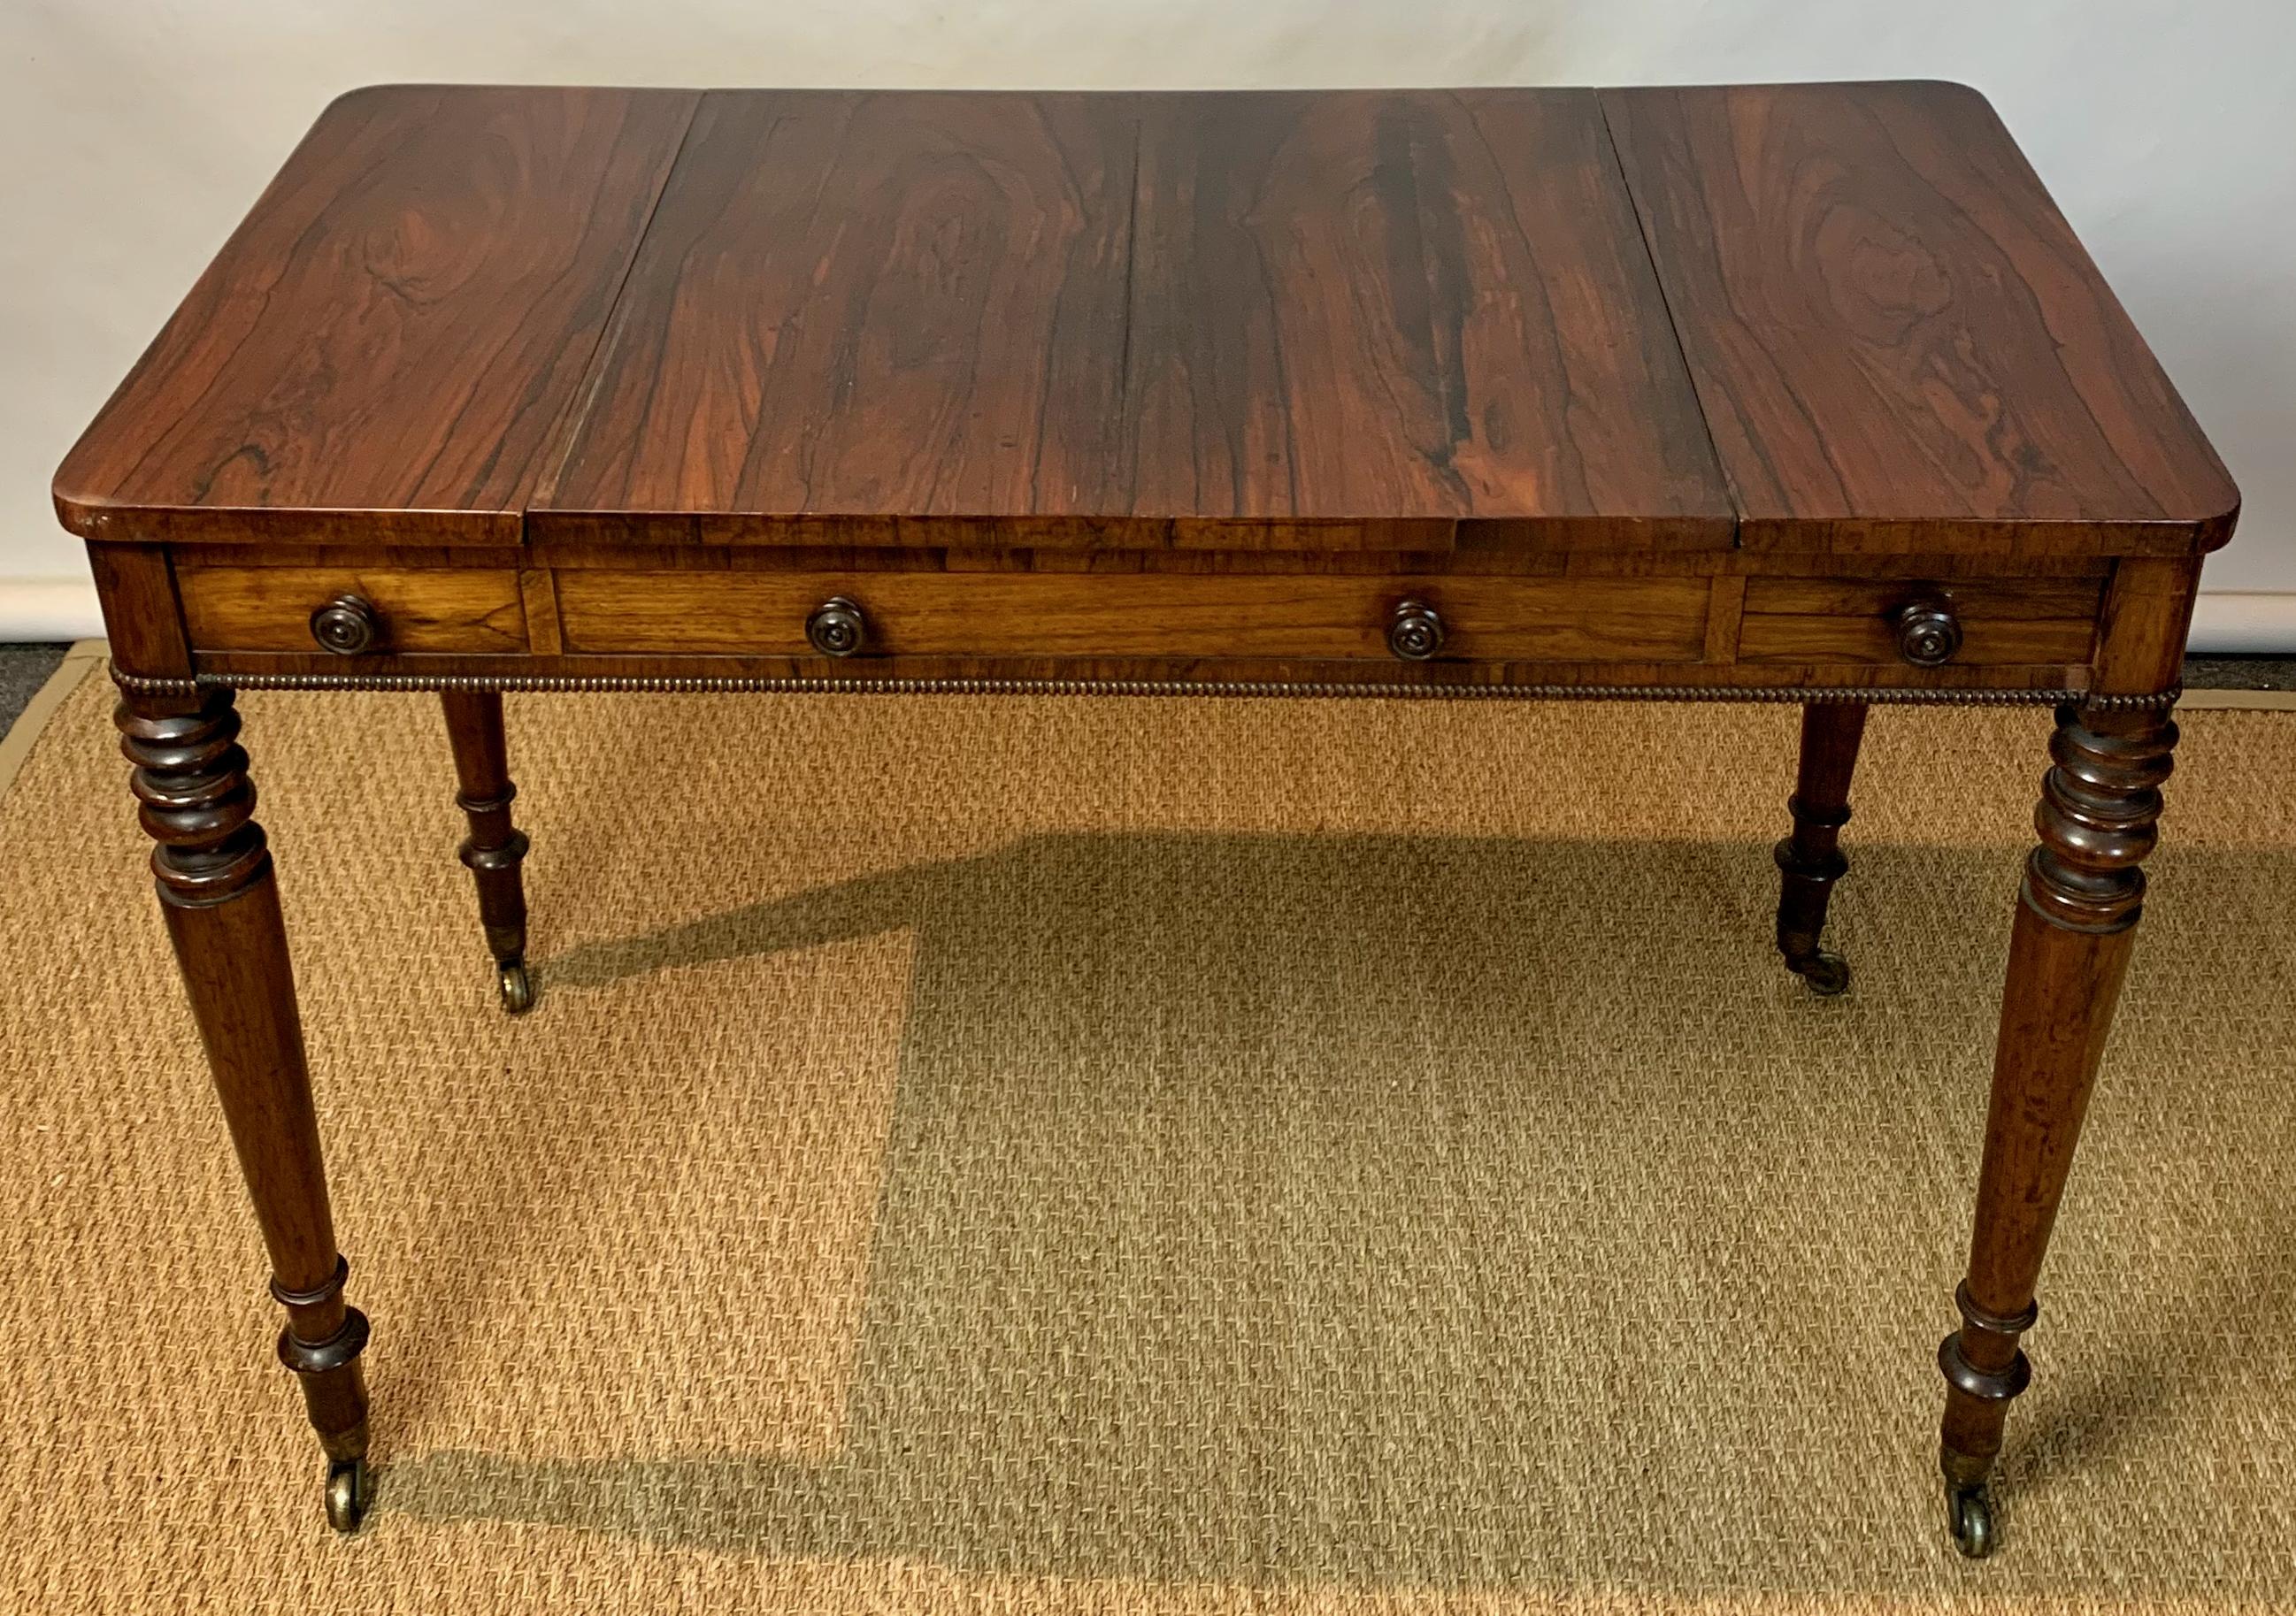 Hand-Crafted English William IV Games or Tric Trac Table